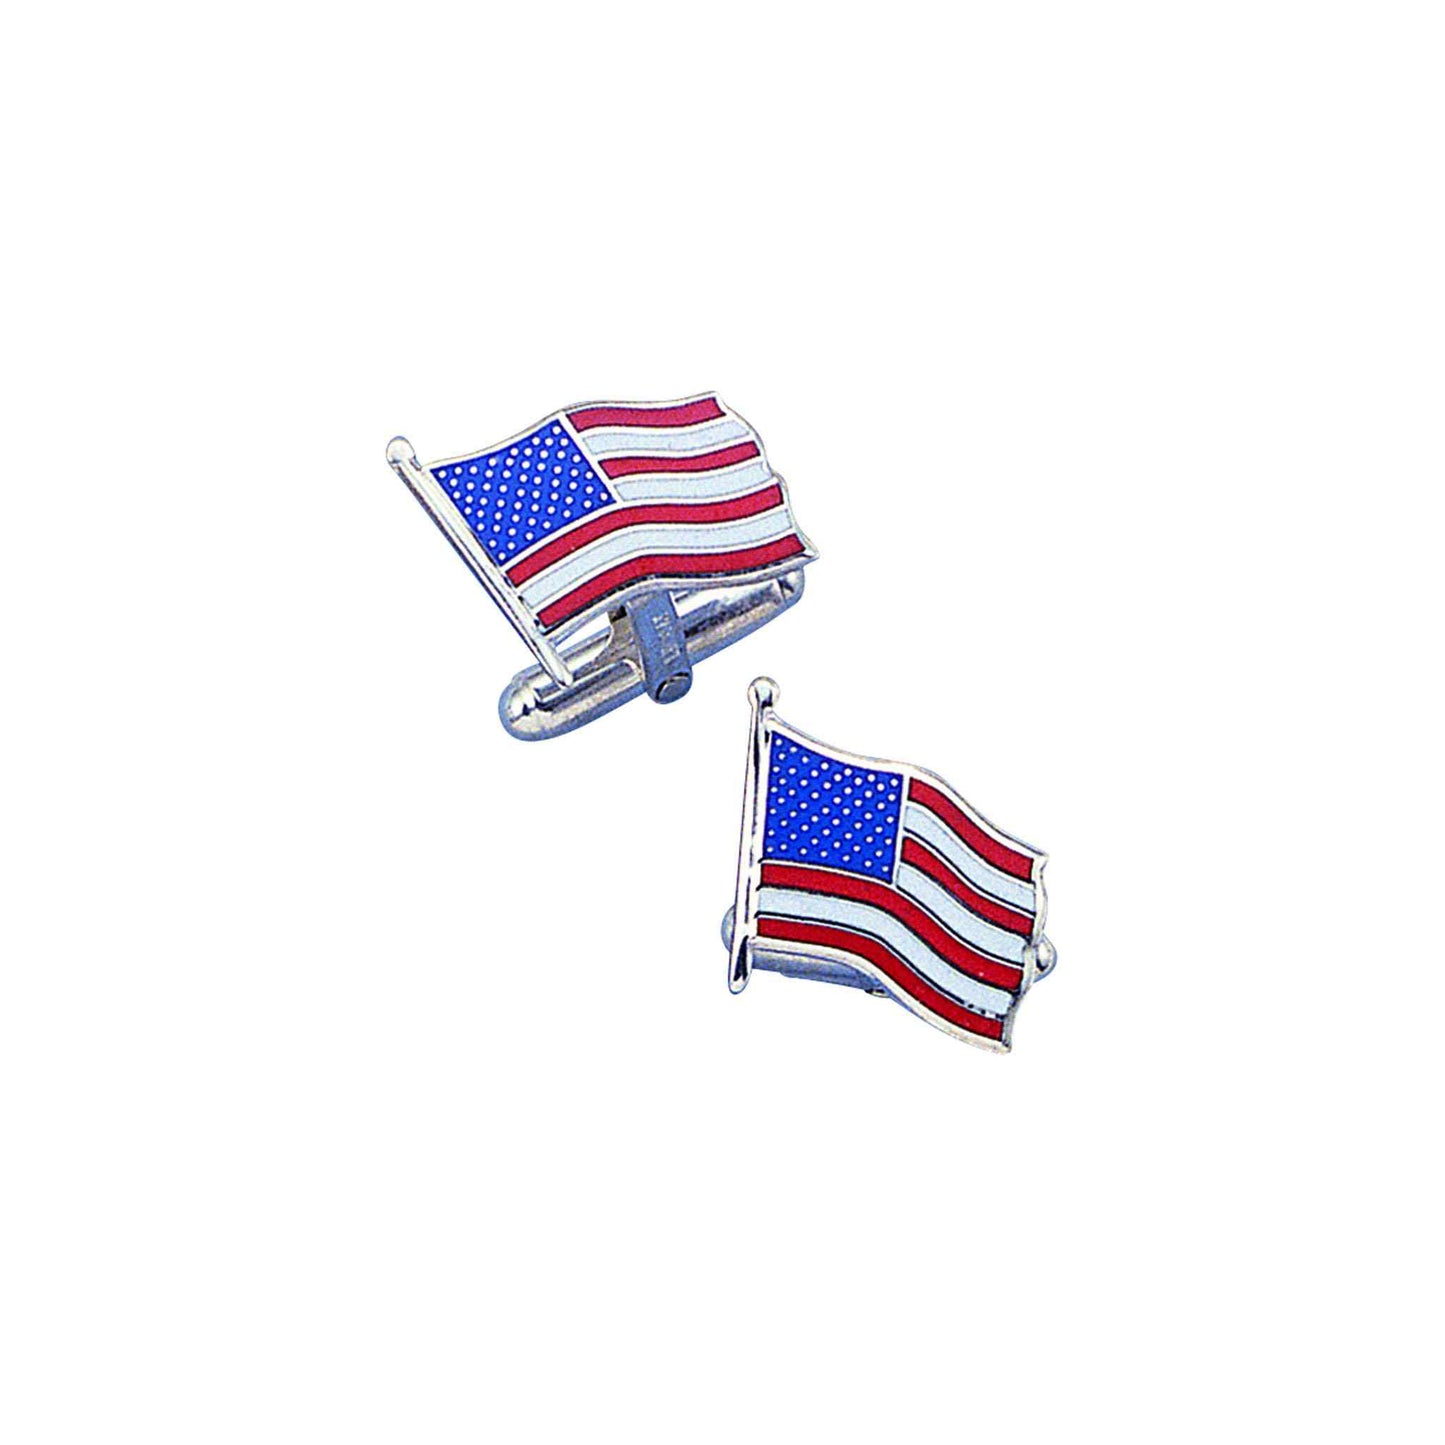 A sterling silver usa flag cufflinks displayed on a neutral white background.